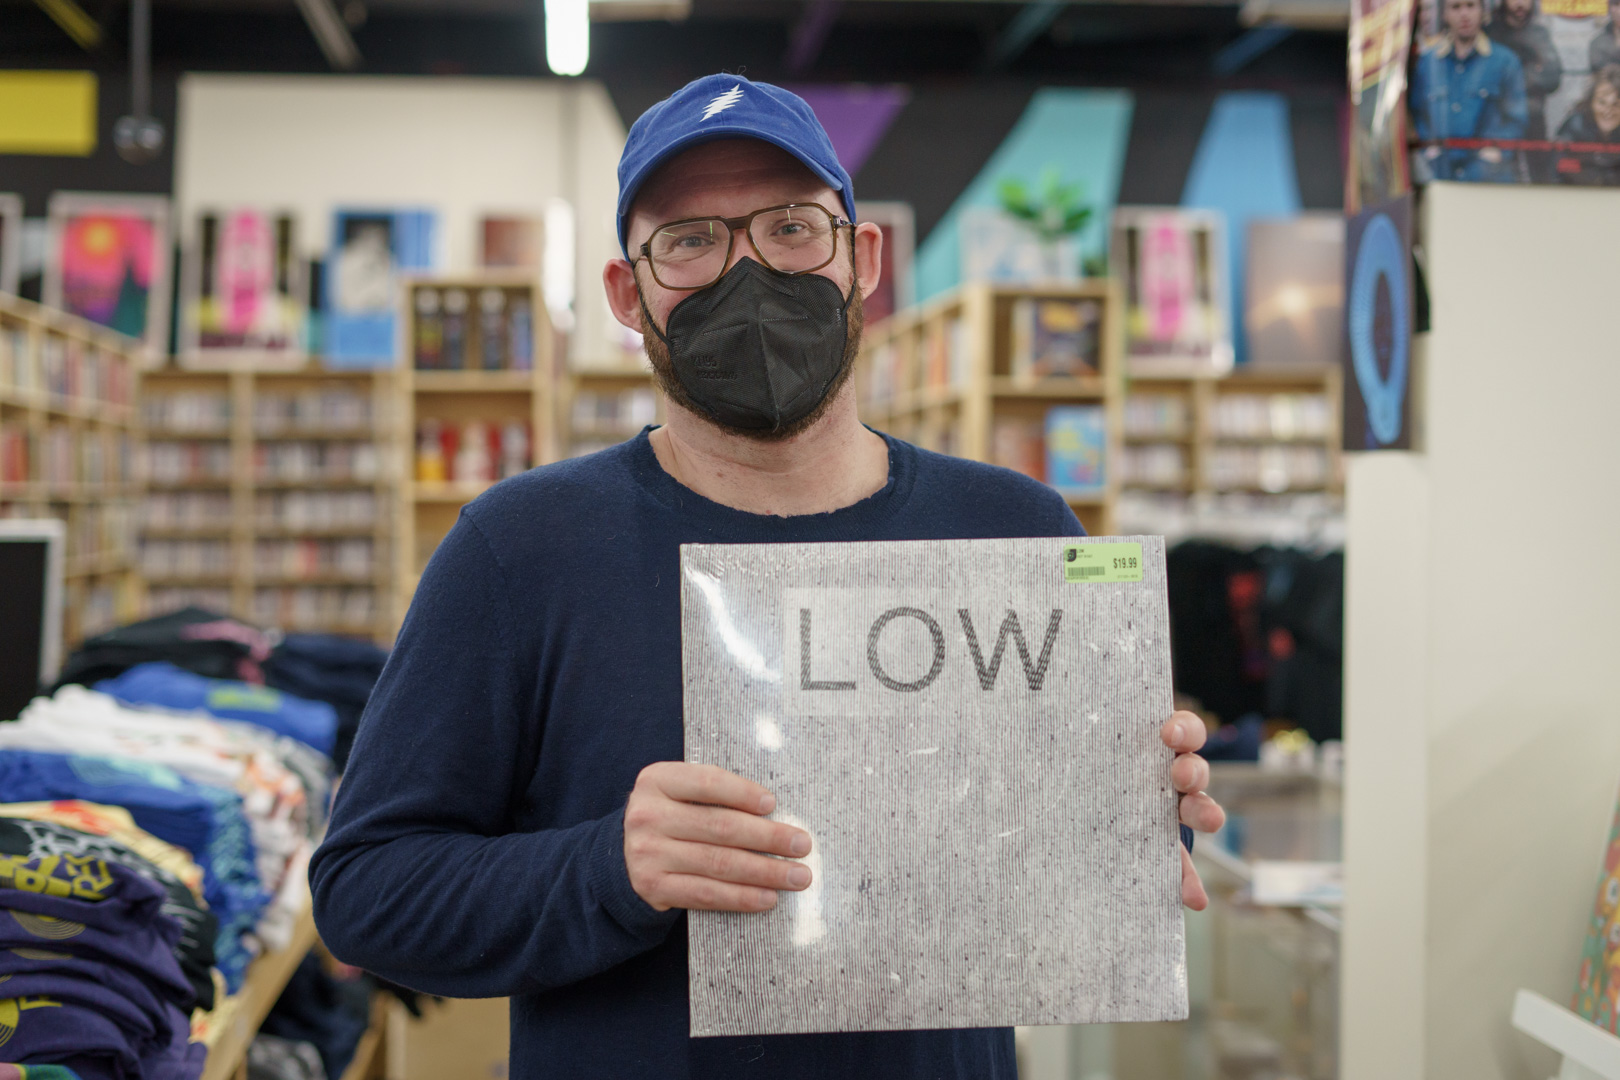 A man in a blue baseball cap and black face mask holds a white vinyl record album with minimalist line artwork.